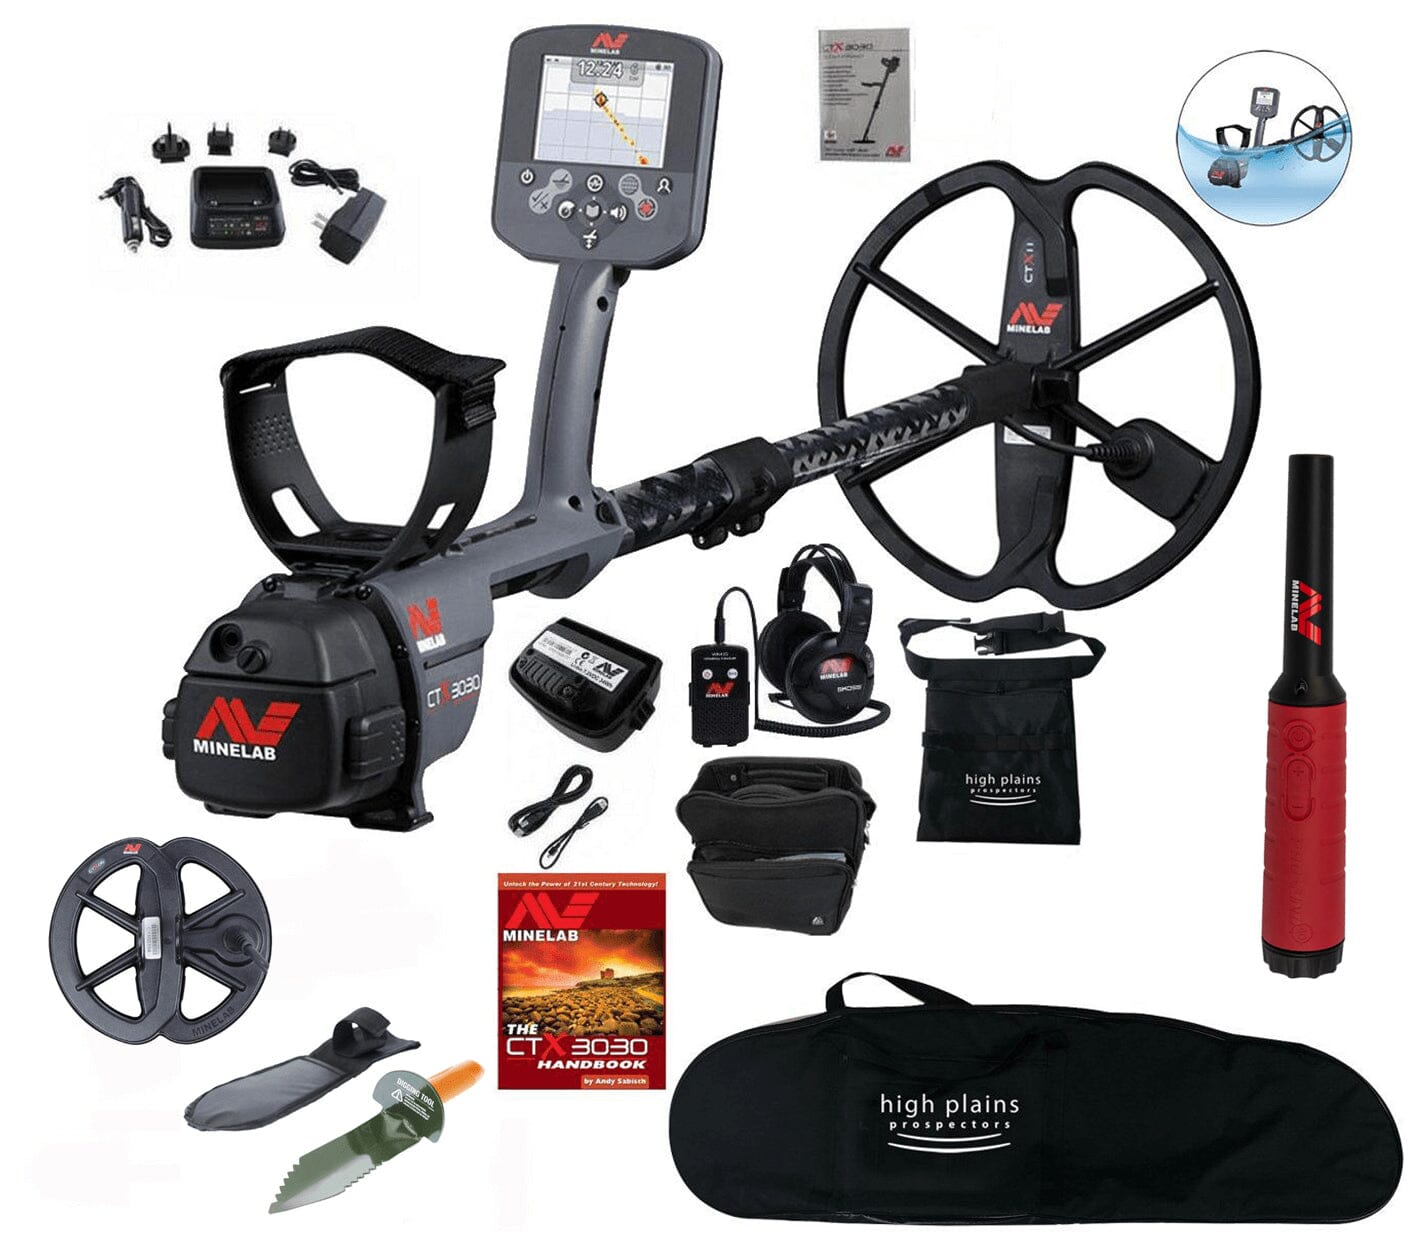 Minelab CTX 3030 Waterproof Metal Detector with Extra 6" Smart Coil, Pro Find 35, and FREE High Plains Gear